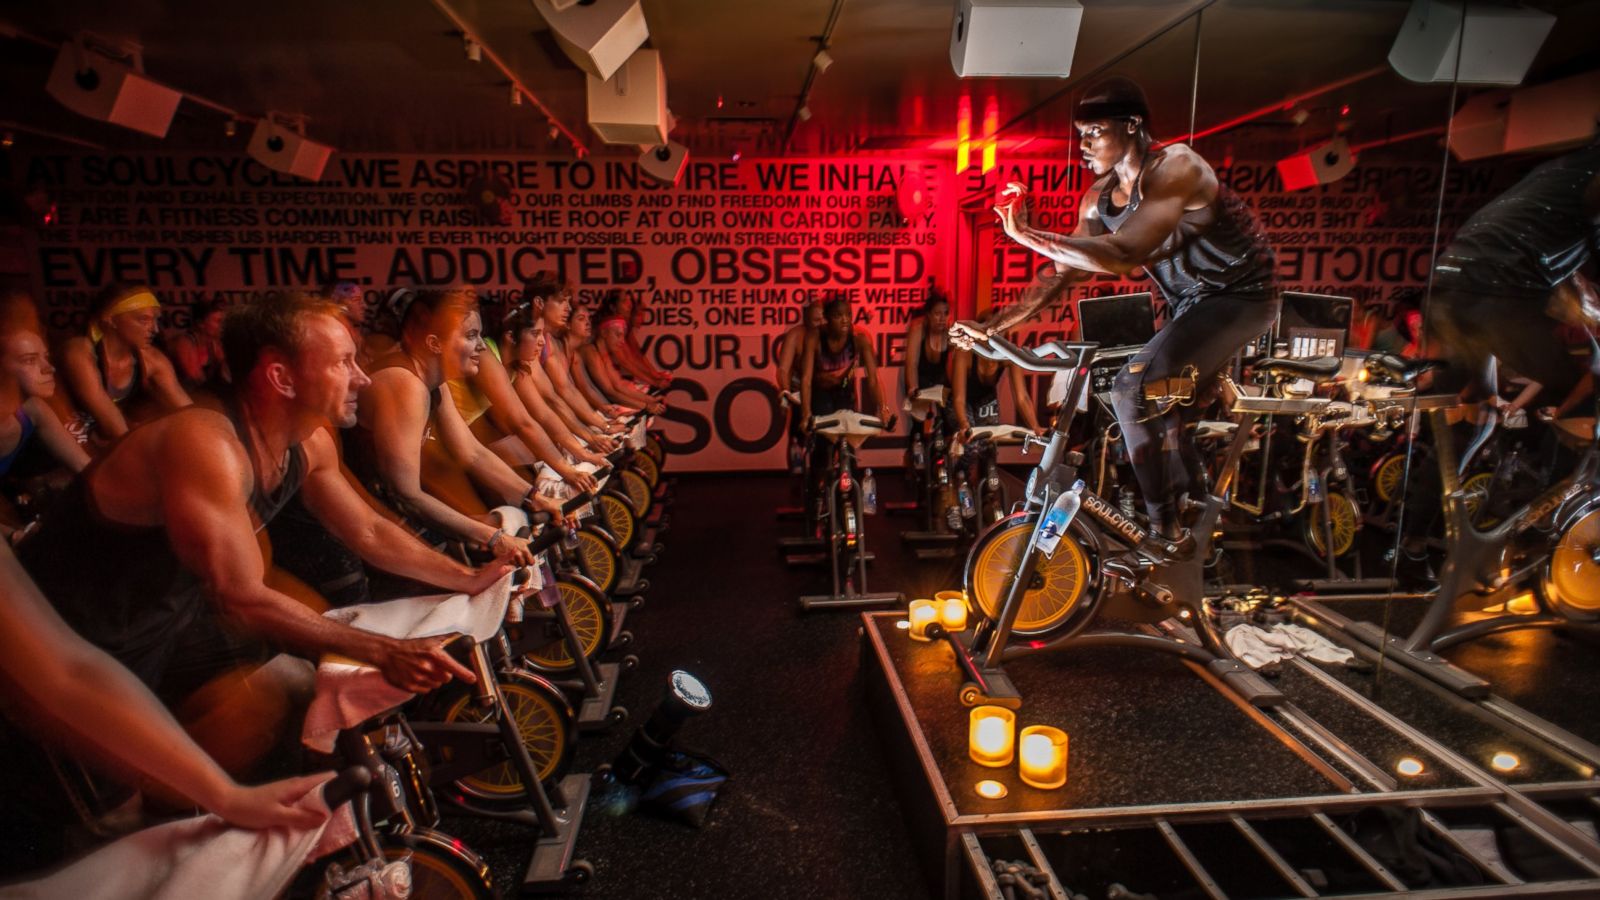 SoulCycle Has Alleged Illegal Payment System With Certificates That Expire Quickly, Suit Says